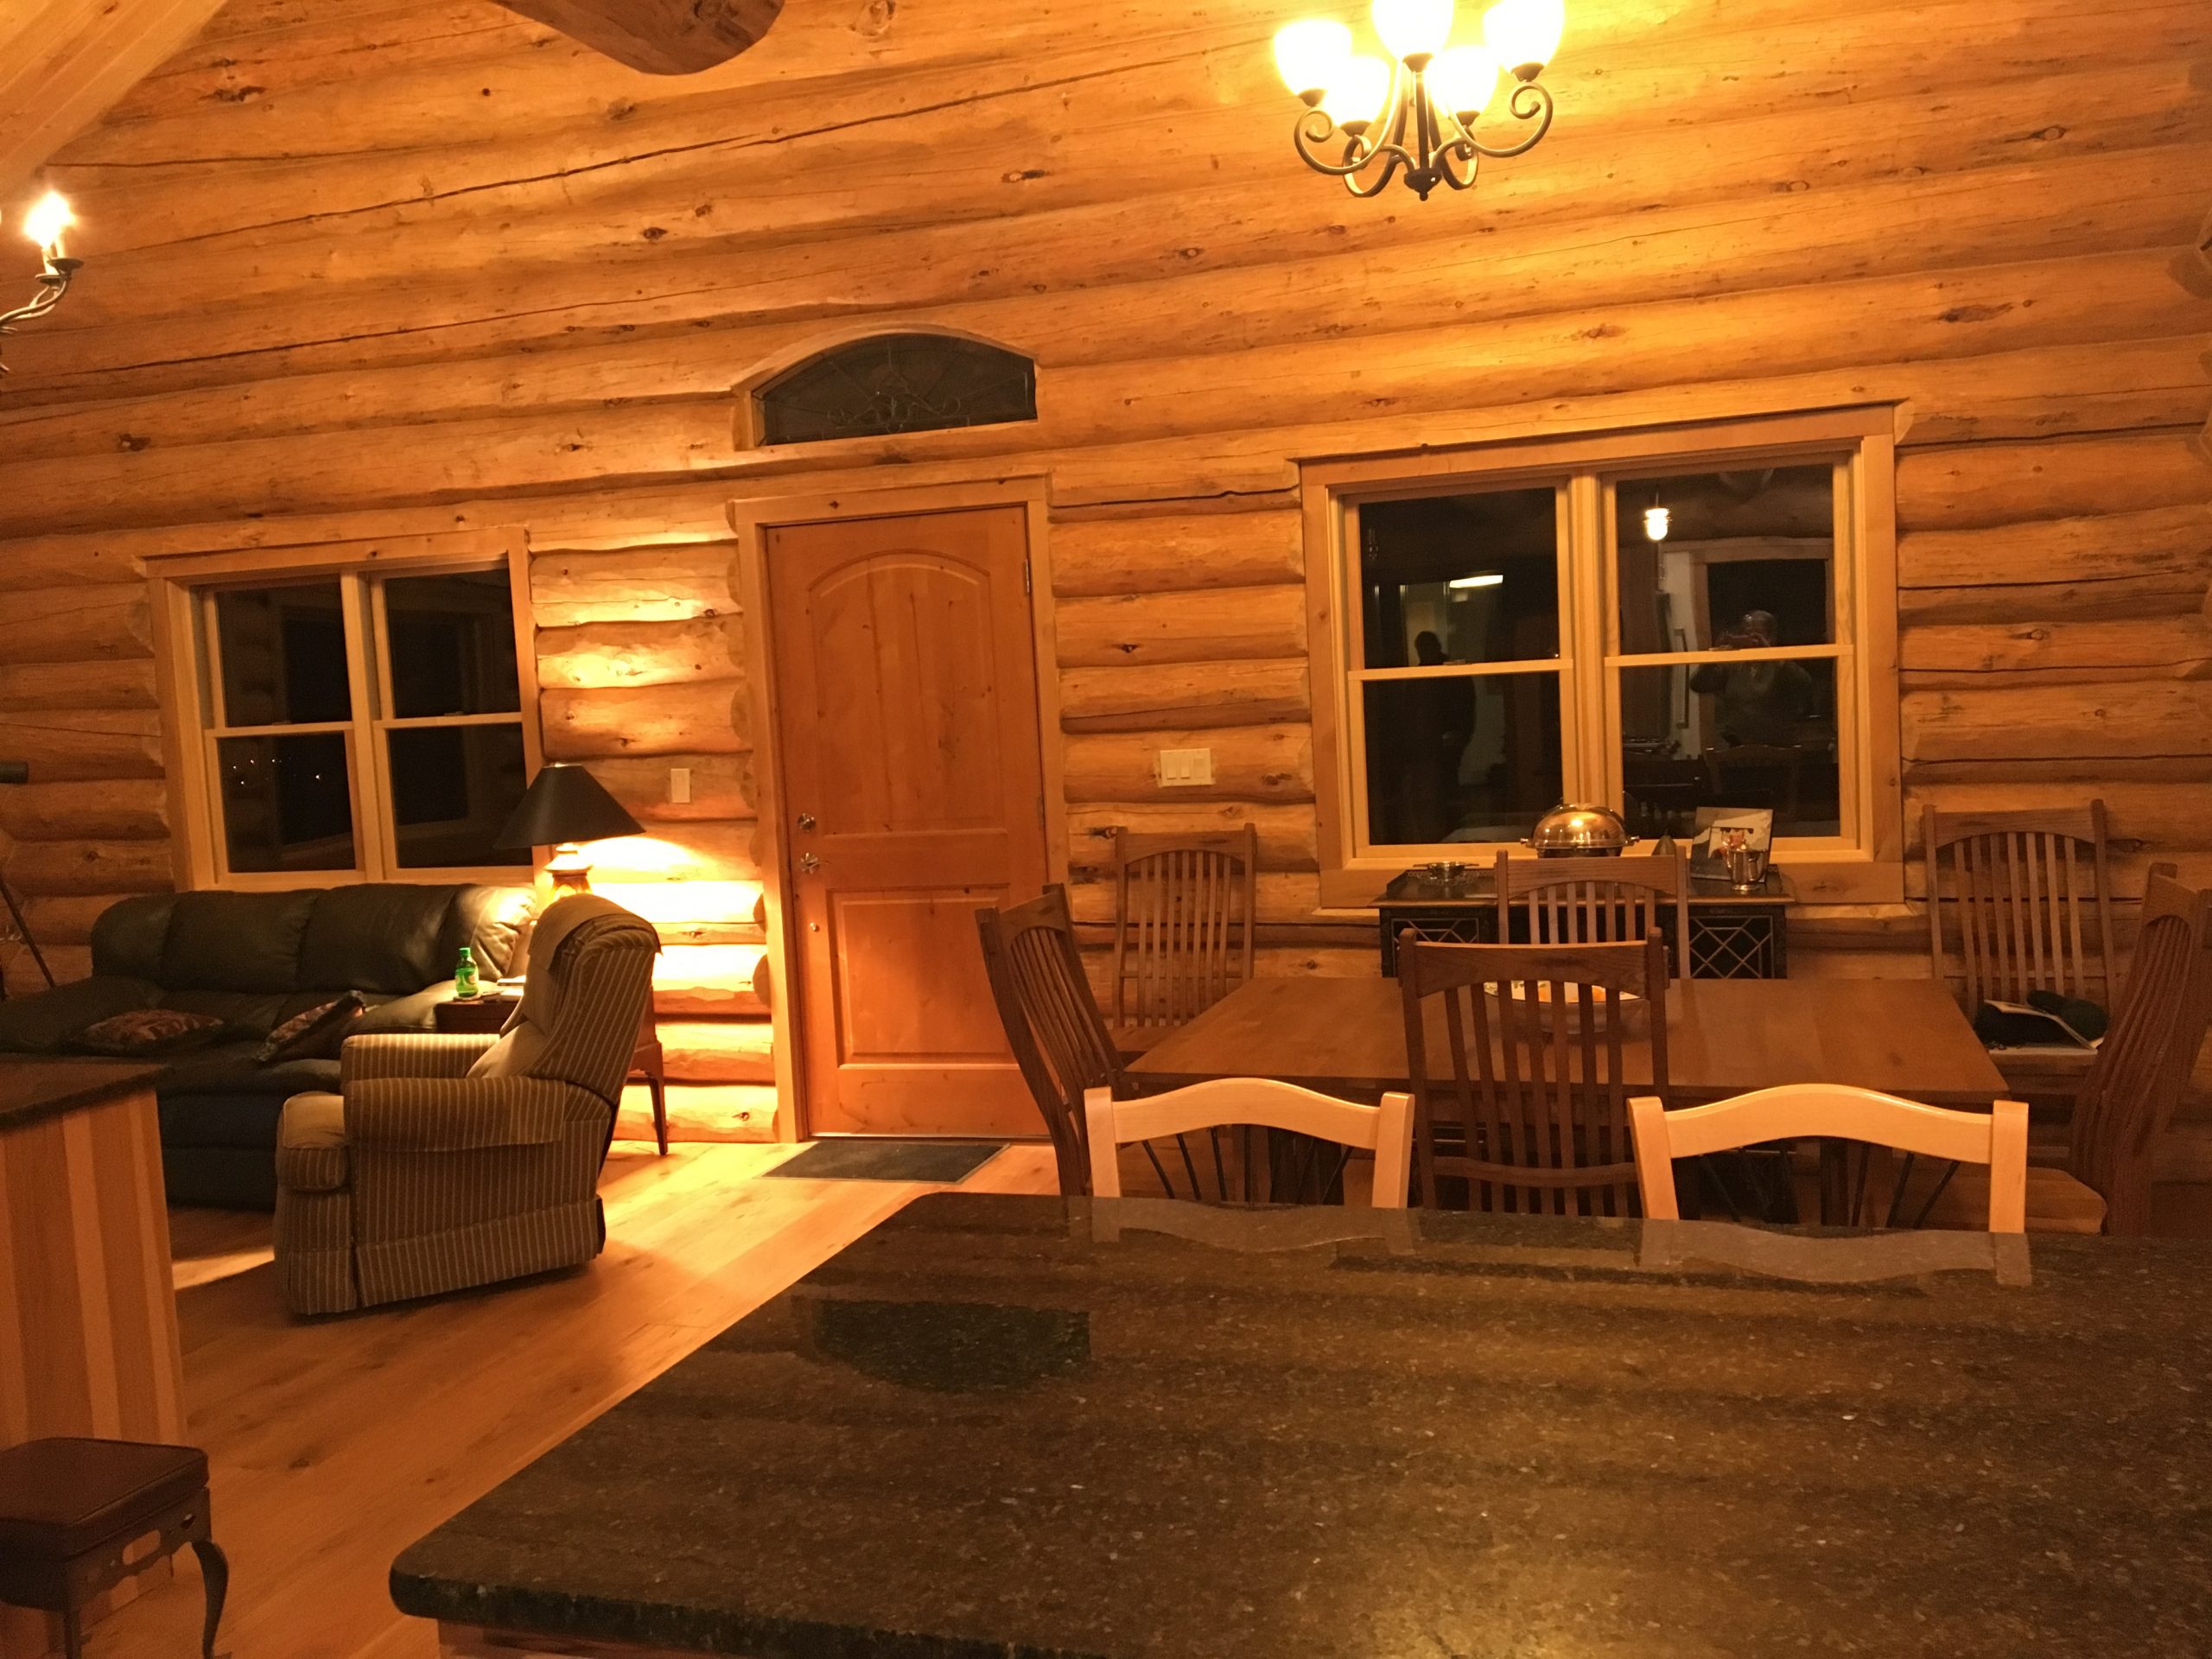 A great room area in a handcrafted log home.